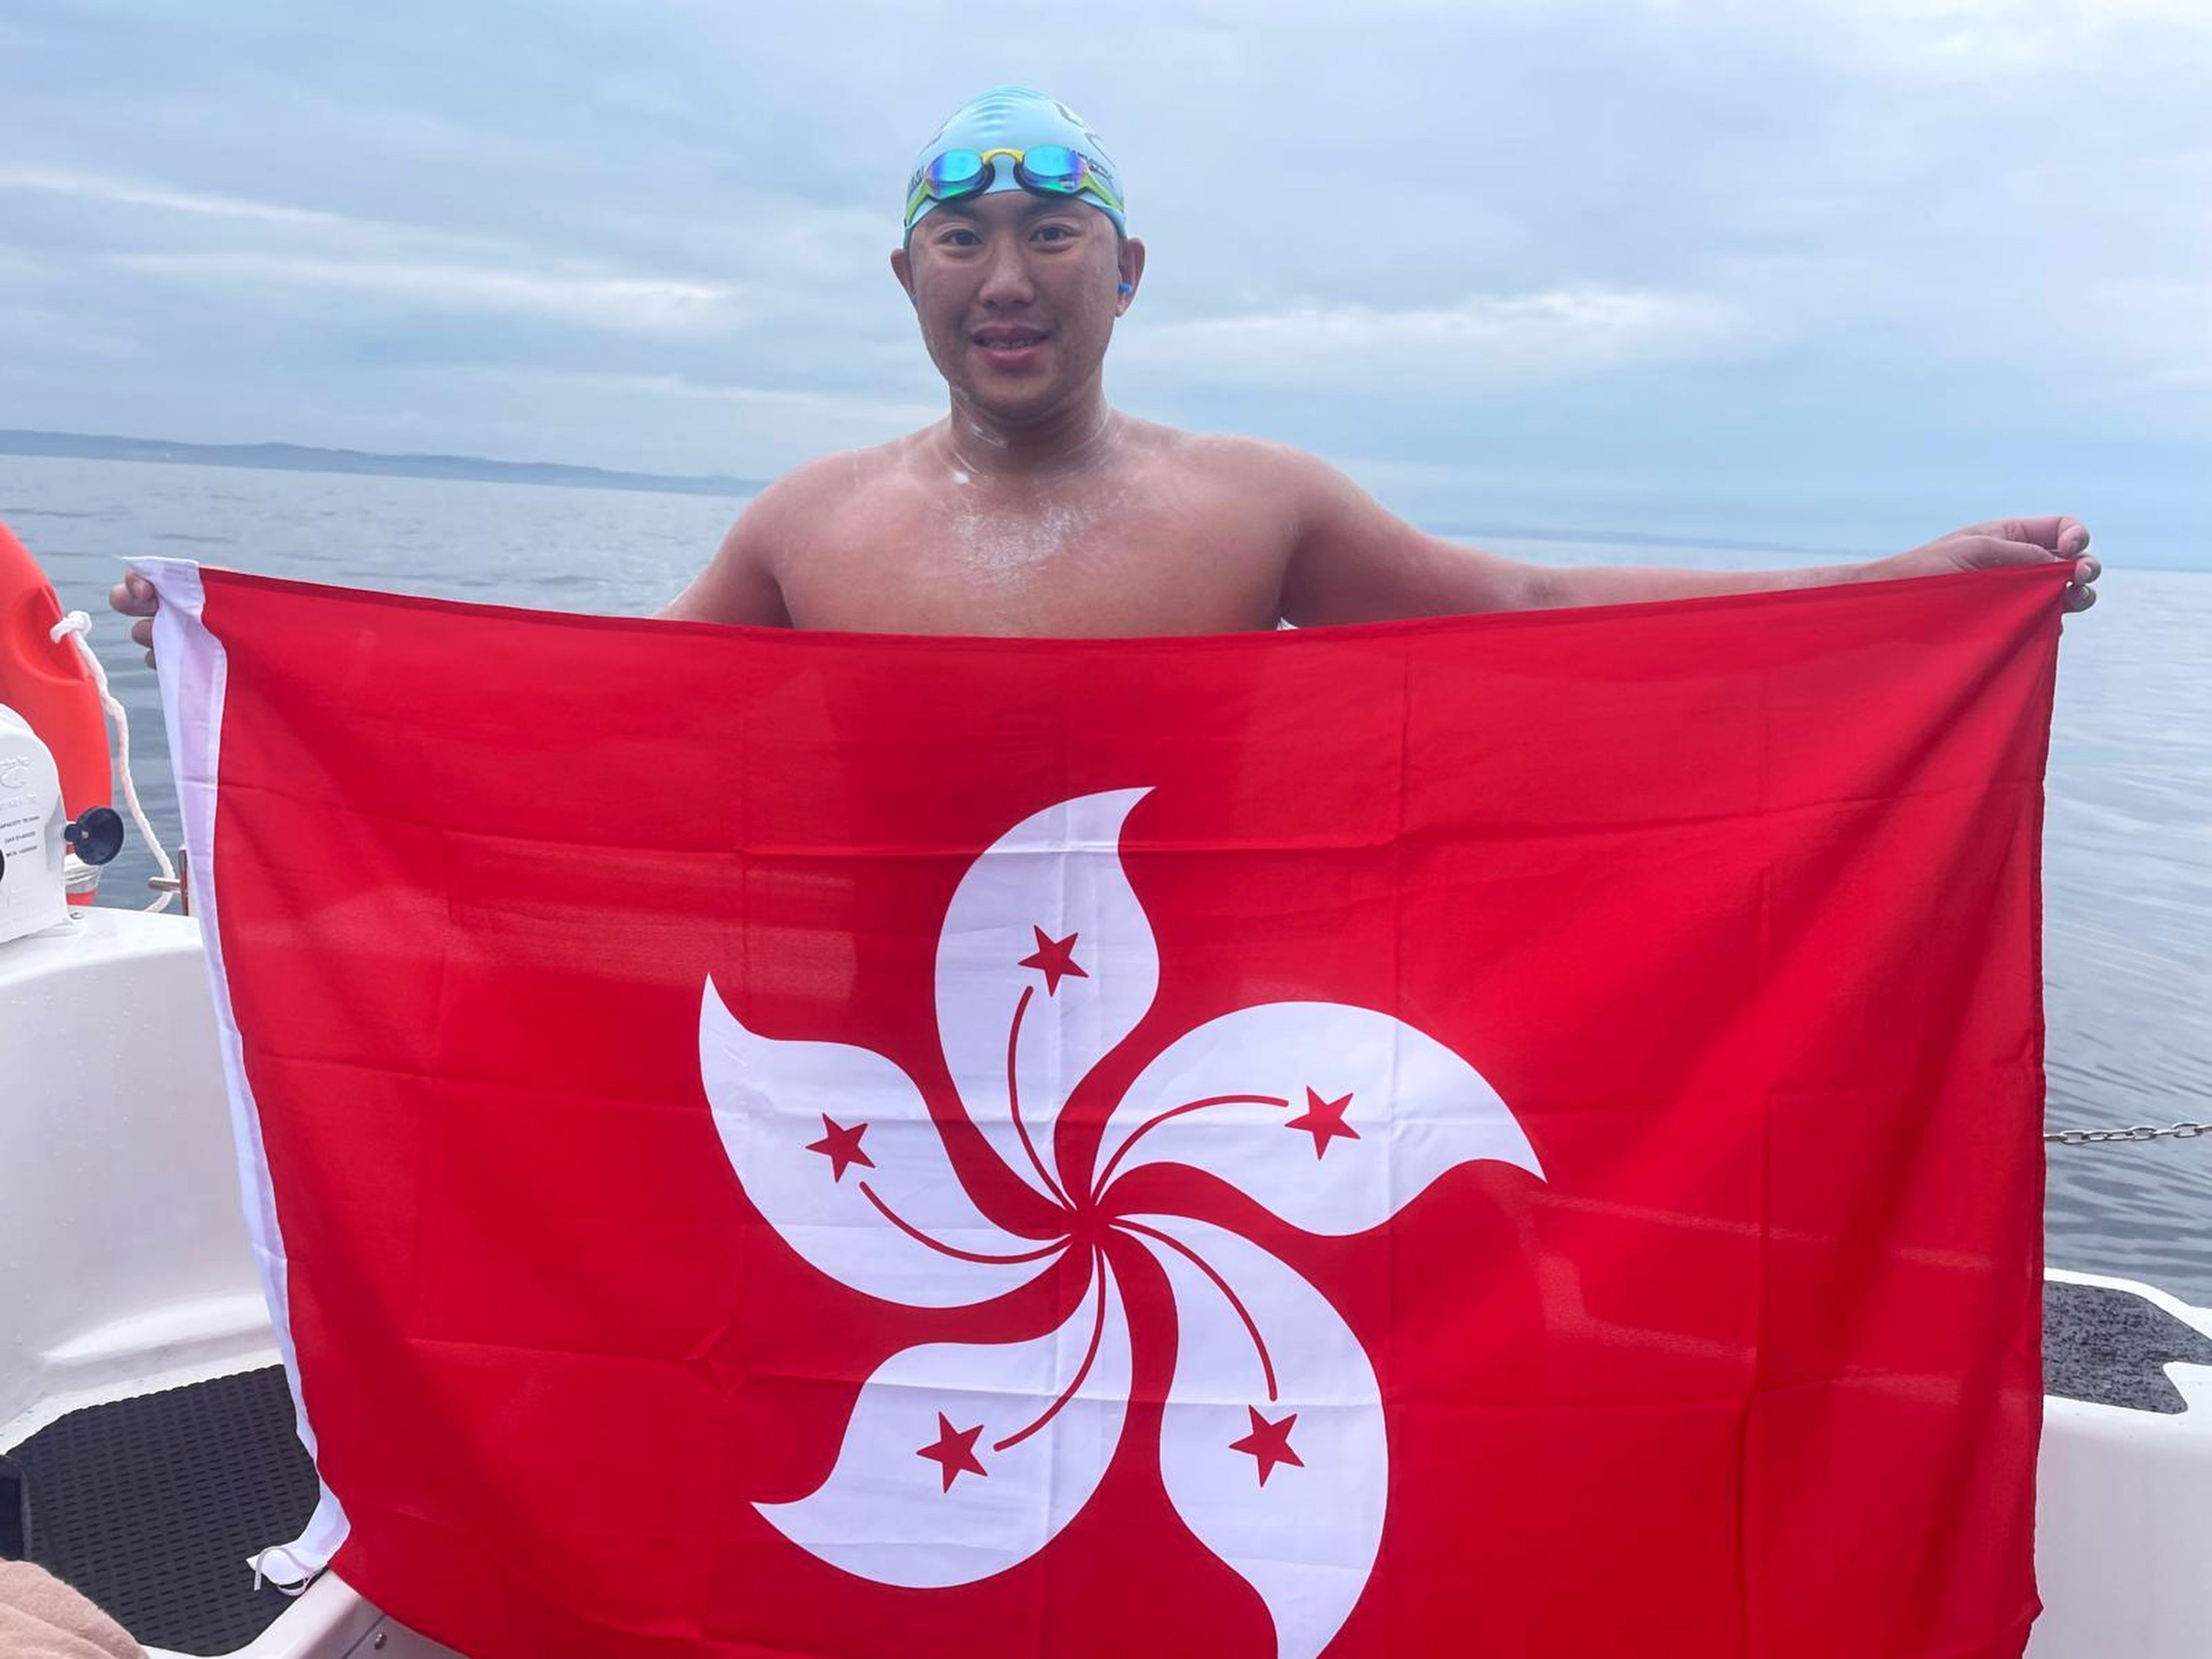 Ryan Leung holds up the Hong Kong flag in Portpatrick on the west coast of Scotland after completing a gruelling 40km swim from Northern Ireland. Photo: Handout